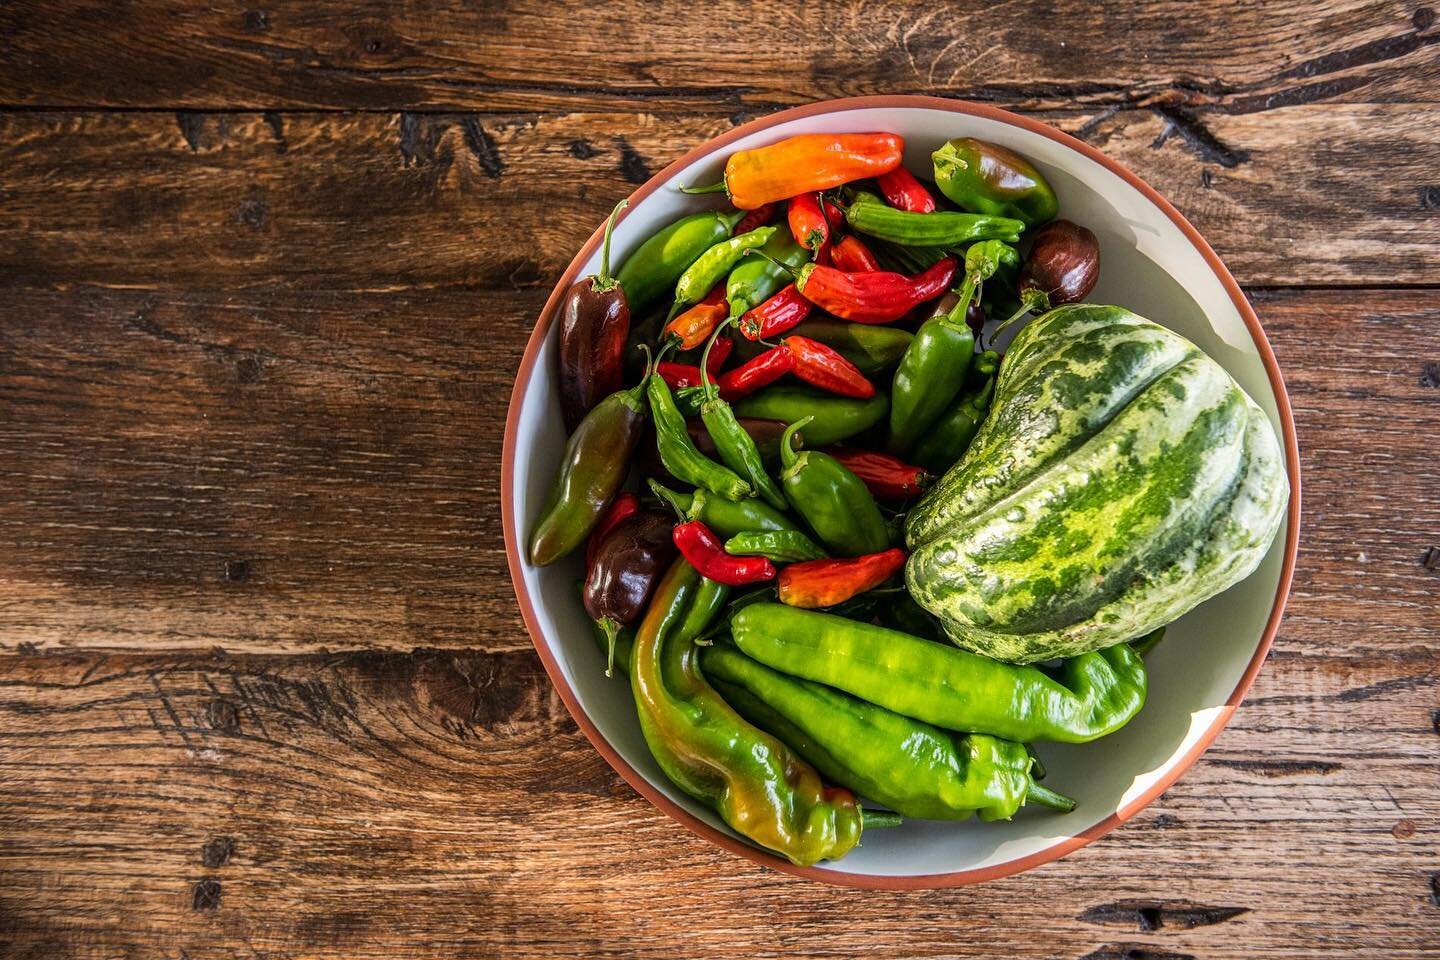 It&rsquo;s pepper season! 🌶 We like to keep our kitchens fresh and spicy with the best #organic produce in Dallas &mdash; right down the street @coxfarmsmarket_. 🫑 🛒 ❤️